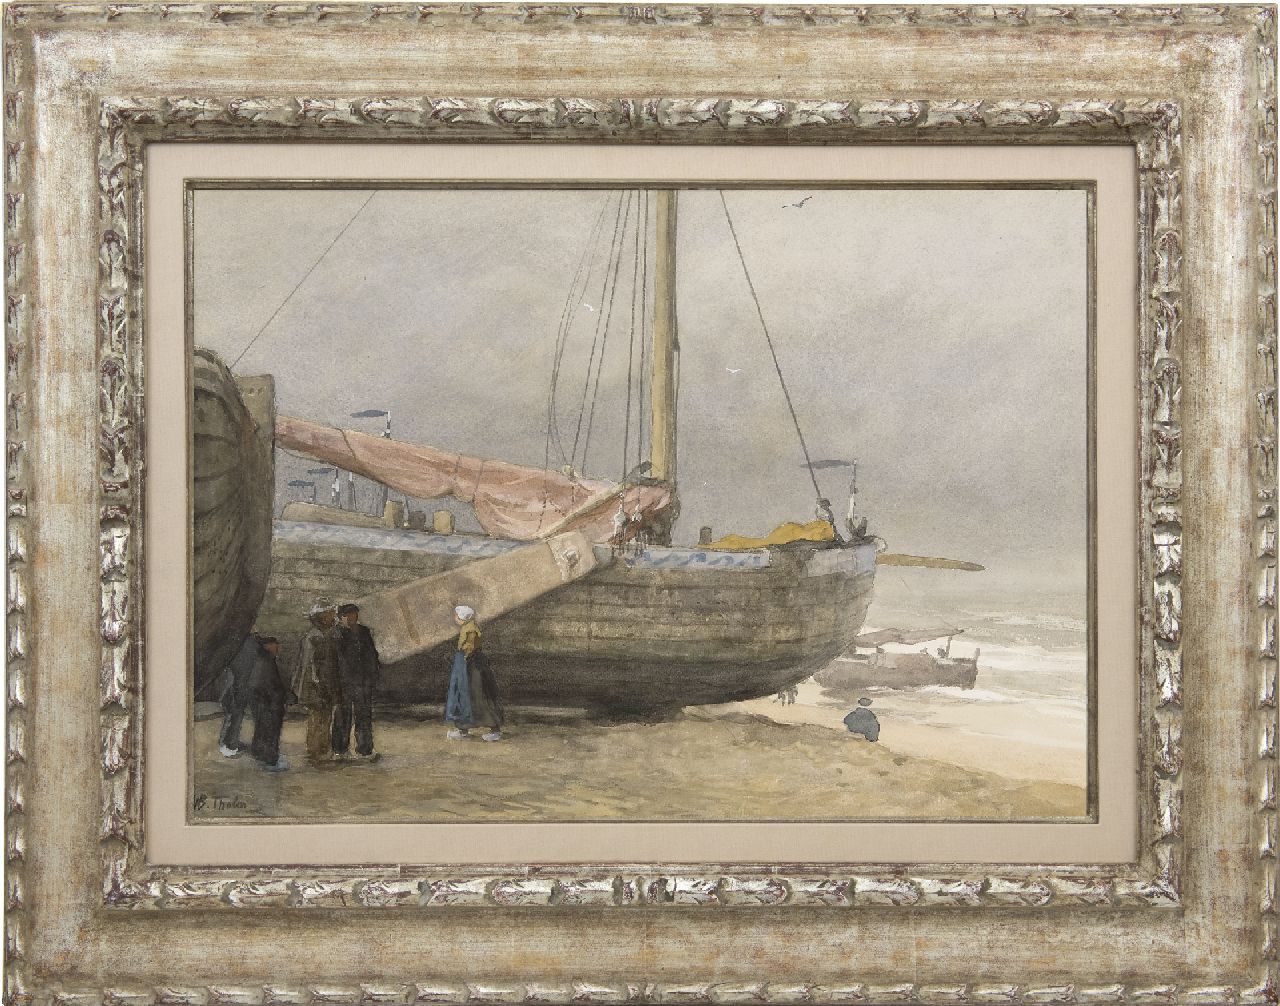 Tholen W.B.  | Willem Bastiaan Tholen | Watercolours and drawings offered for sale | Fisherfolk and boats on the Scheveningen beach, watercolour on paper 37.4 x 53.4 cm, signed l.l.